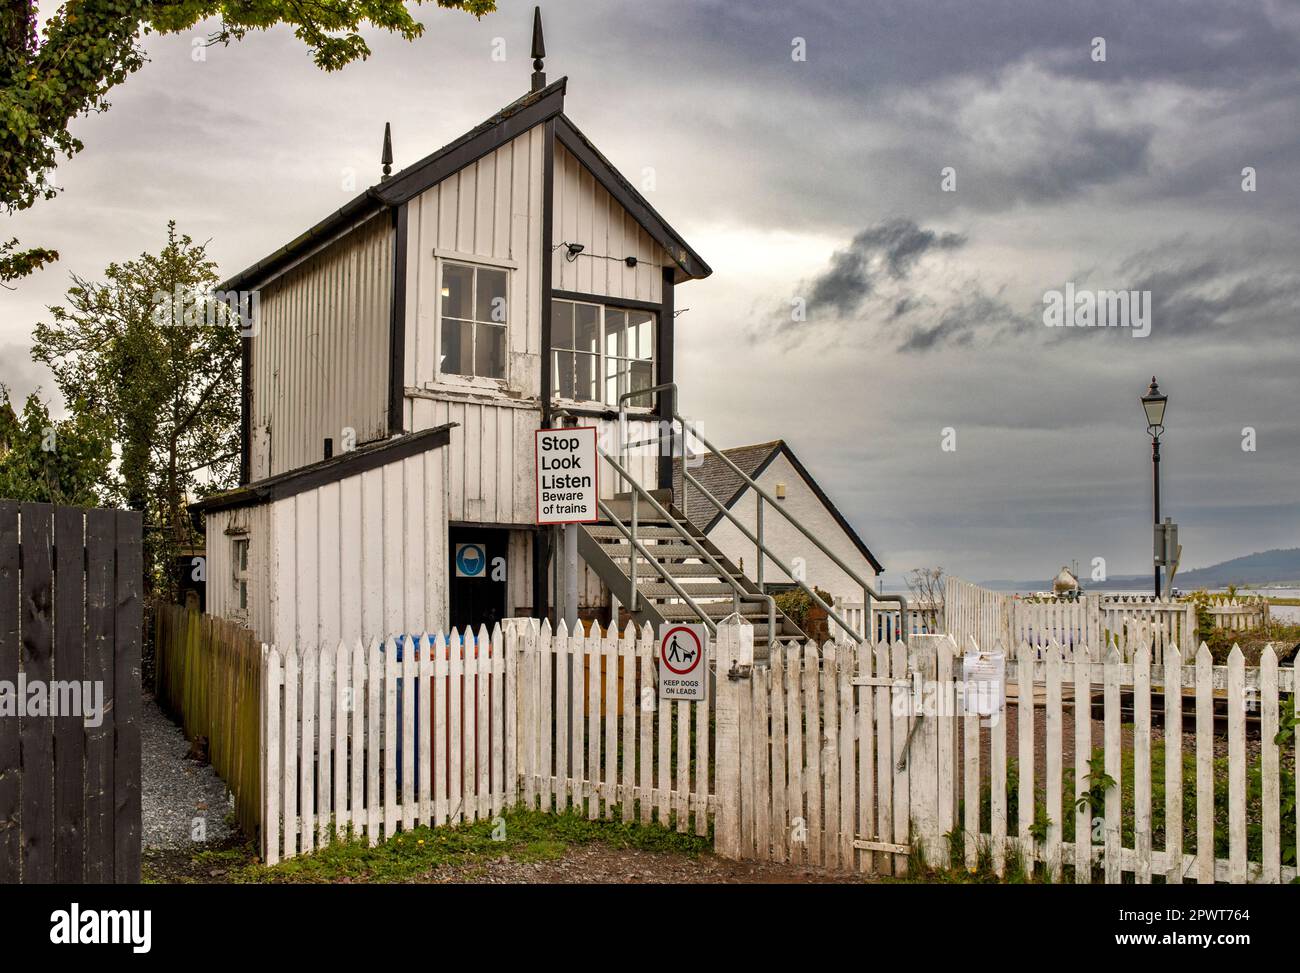 Inverness Scotland the Clachnaharry railway white signal box a listed building Stock Photo